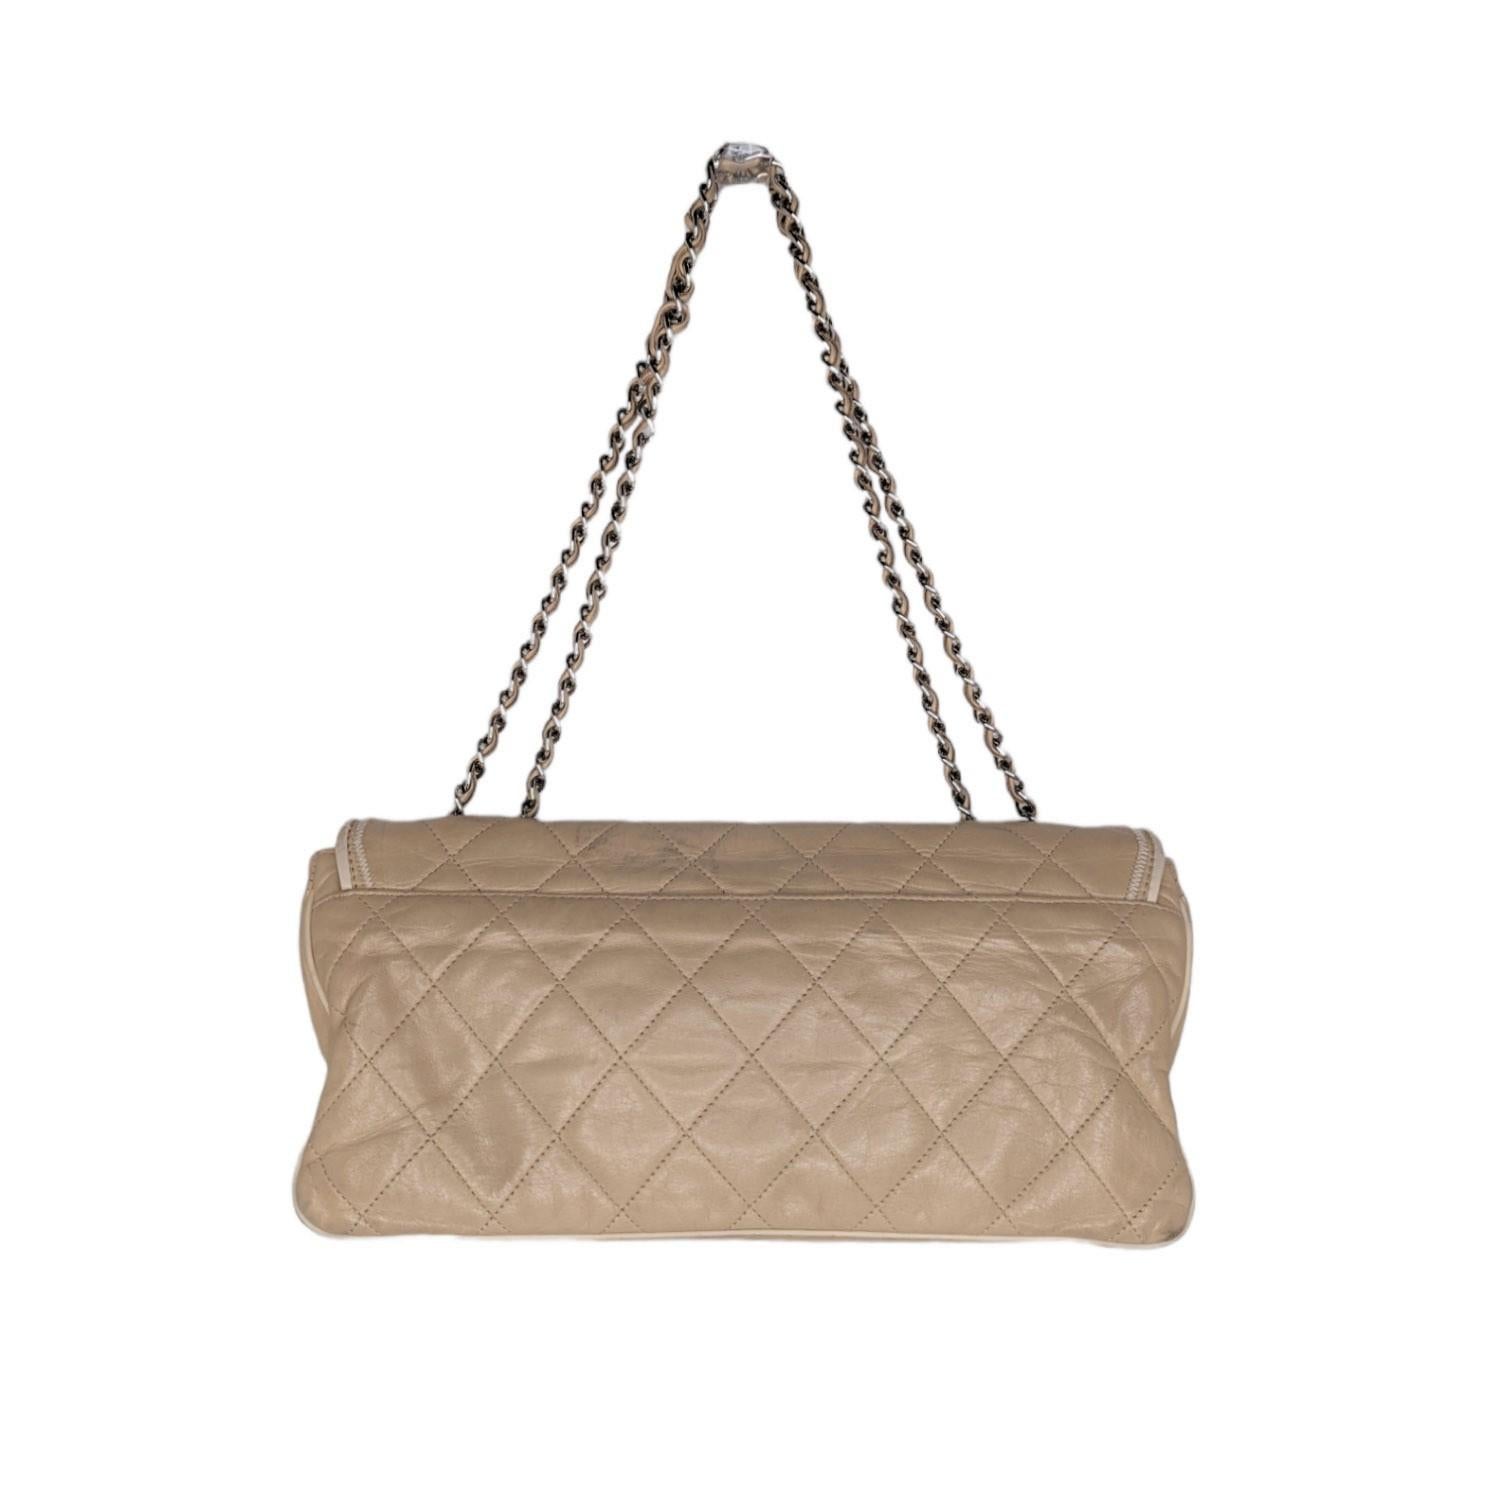 Go glam with this gorgeous Chanel Mademoiselle East-West Flap, crafted in beige diamond-quilted lambskin leather with contrast stitching, featuring a silver-tone chain link shoulder strap threaded with leather, sides that expand, a Mademoiselle